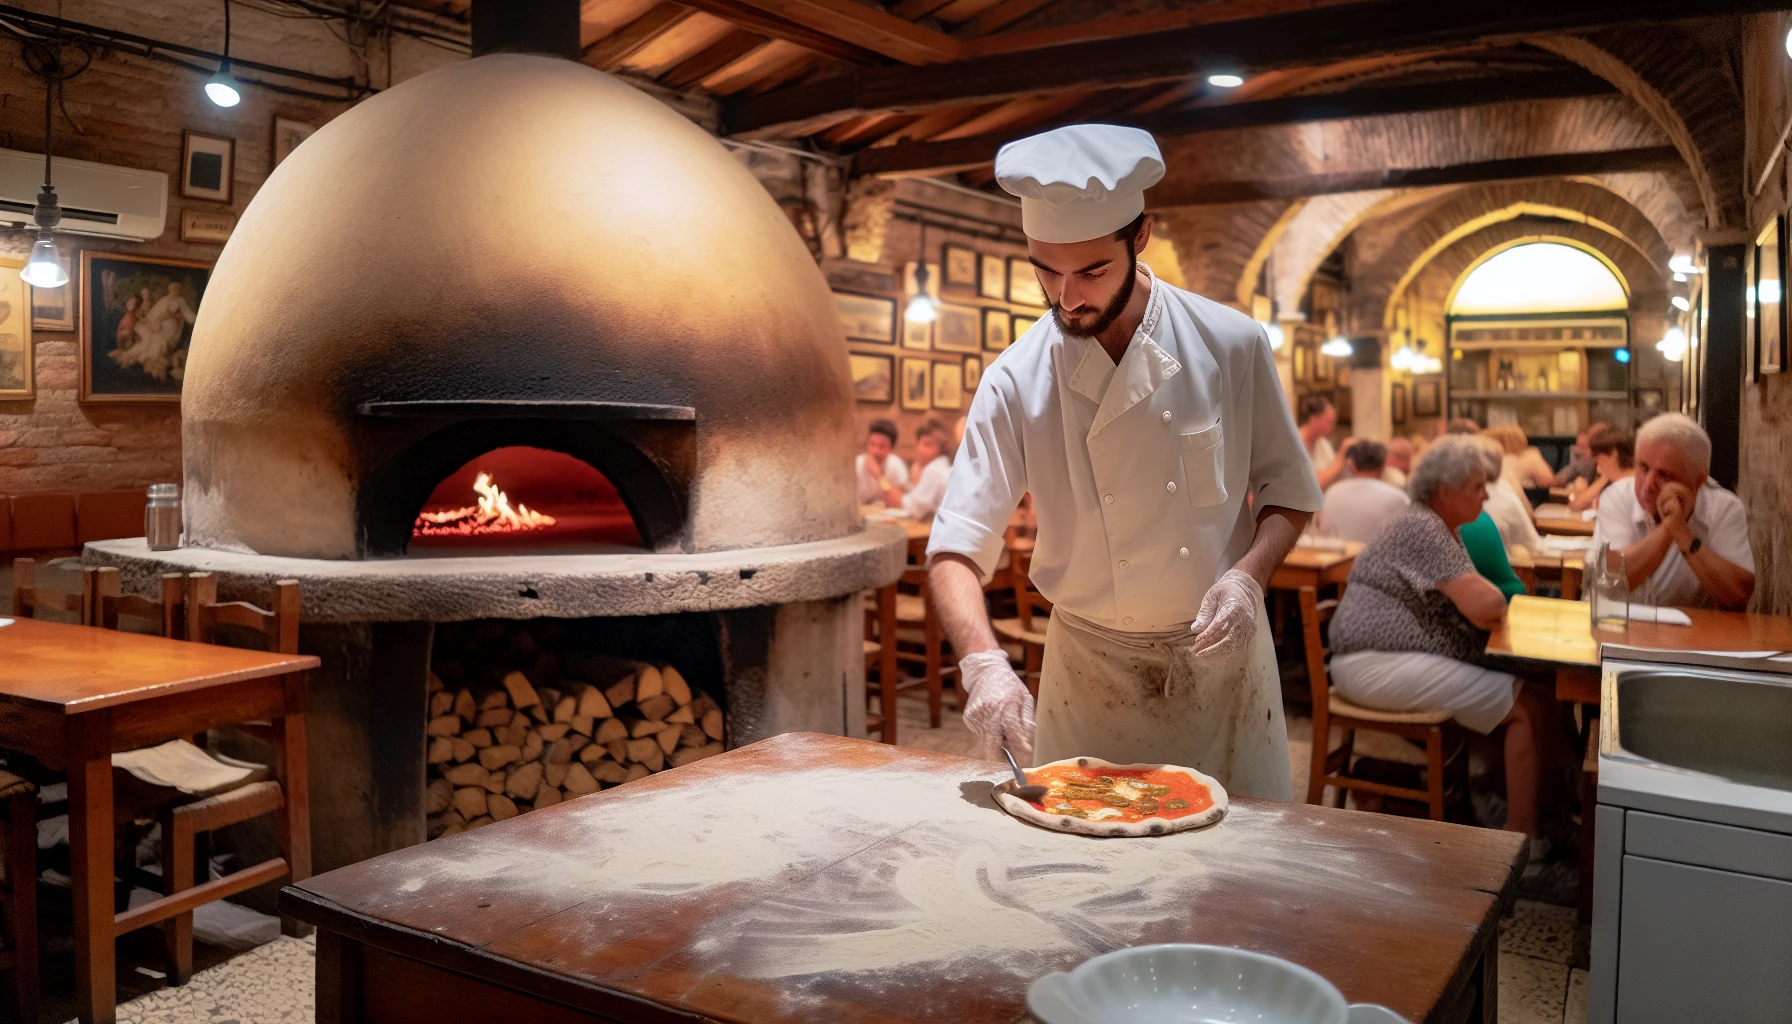 A traditional wood-fired pizza oven with a chef preparing a pizza